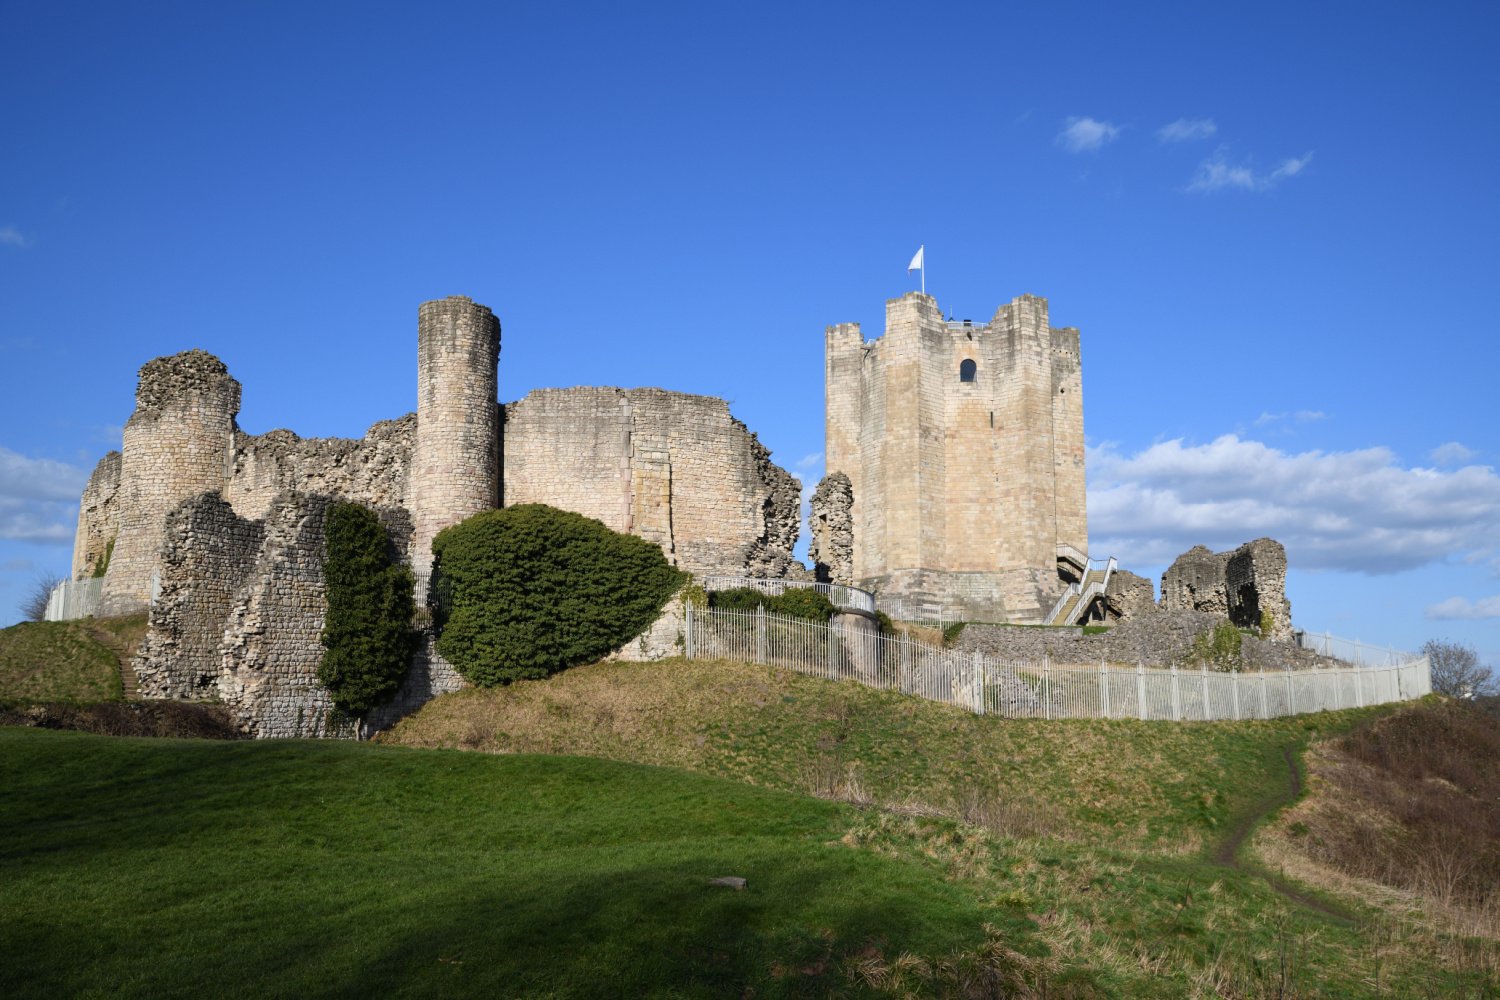 Image name conisbrough castle near doncaster south yorkshire the 18 image from the post A look at the history of Conisbrough Castle, with Dr Emma Wells in Yorkshire.com.